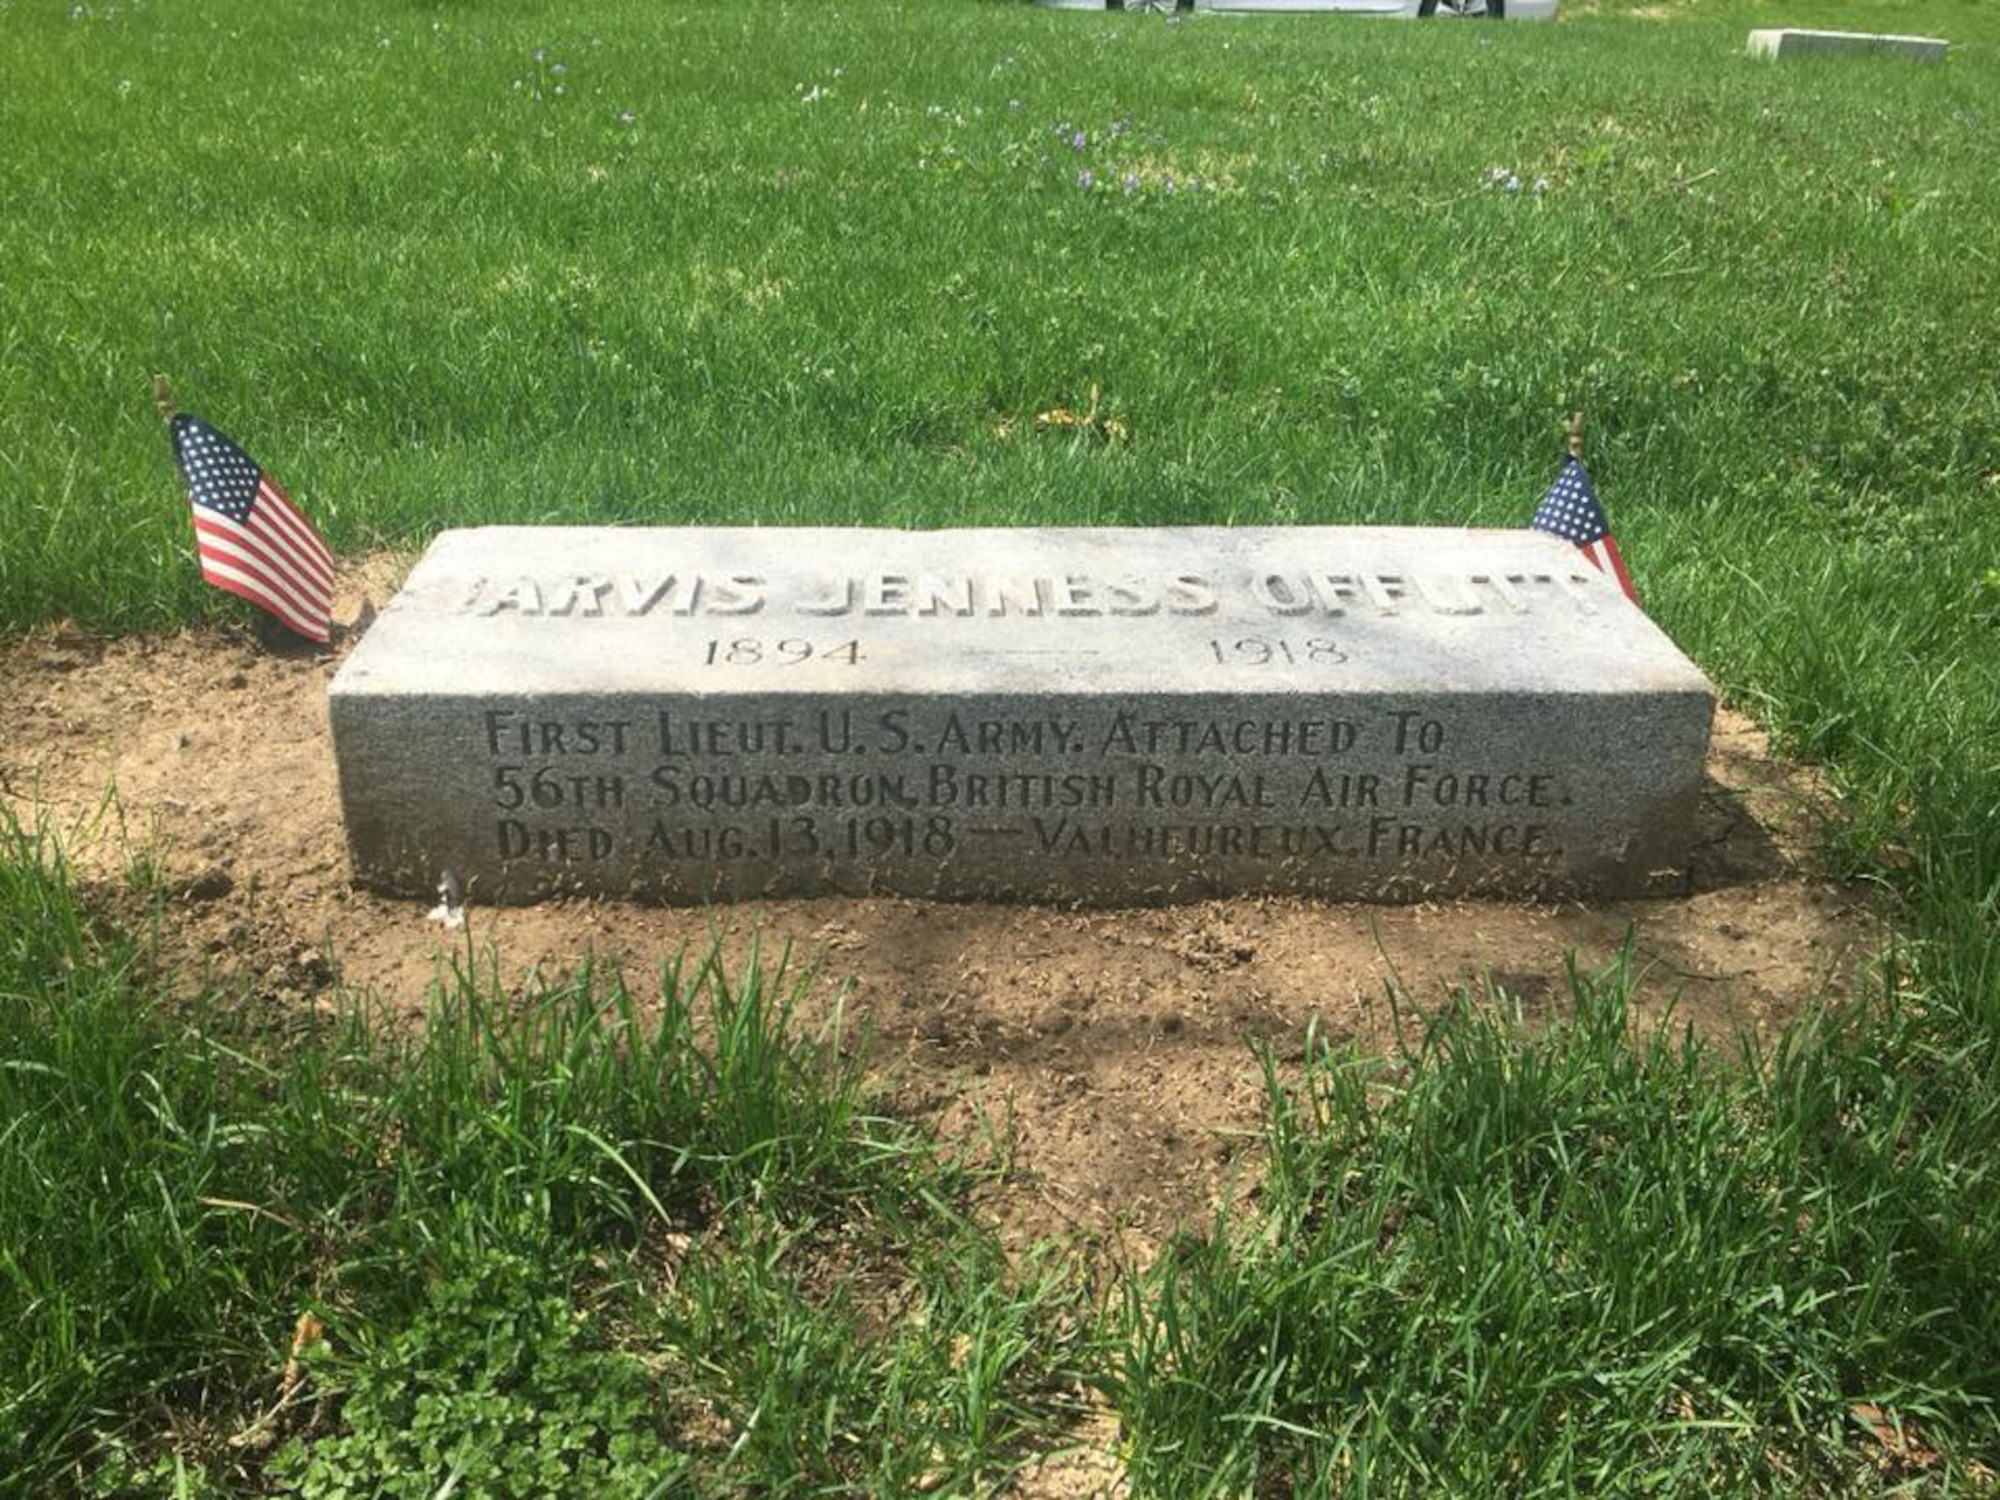 The gravestone of U.S. Army 1st Lt. Jarvis Offutt surrounded by dirt from the process of raising the stone May 1, 2018, at Forrest Lawn Memorial Park, Nebraska.